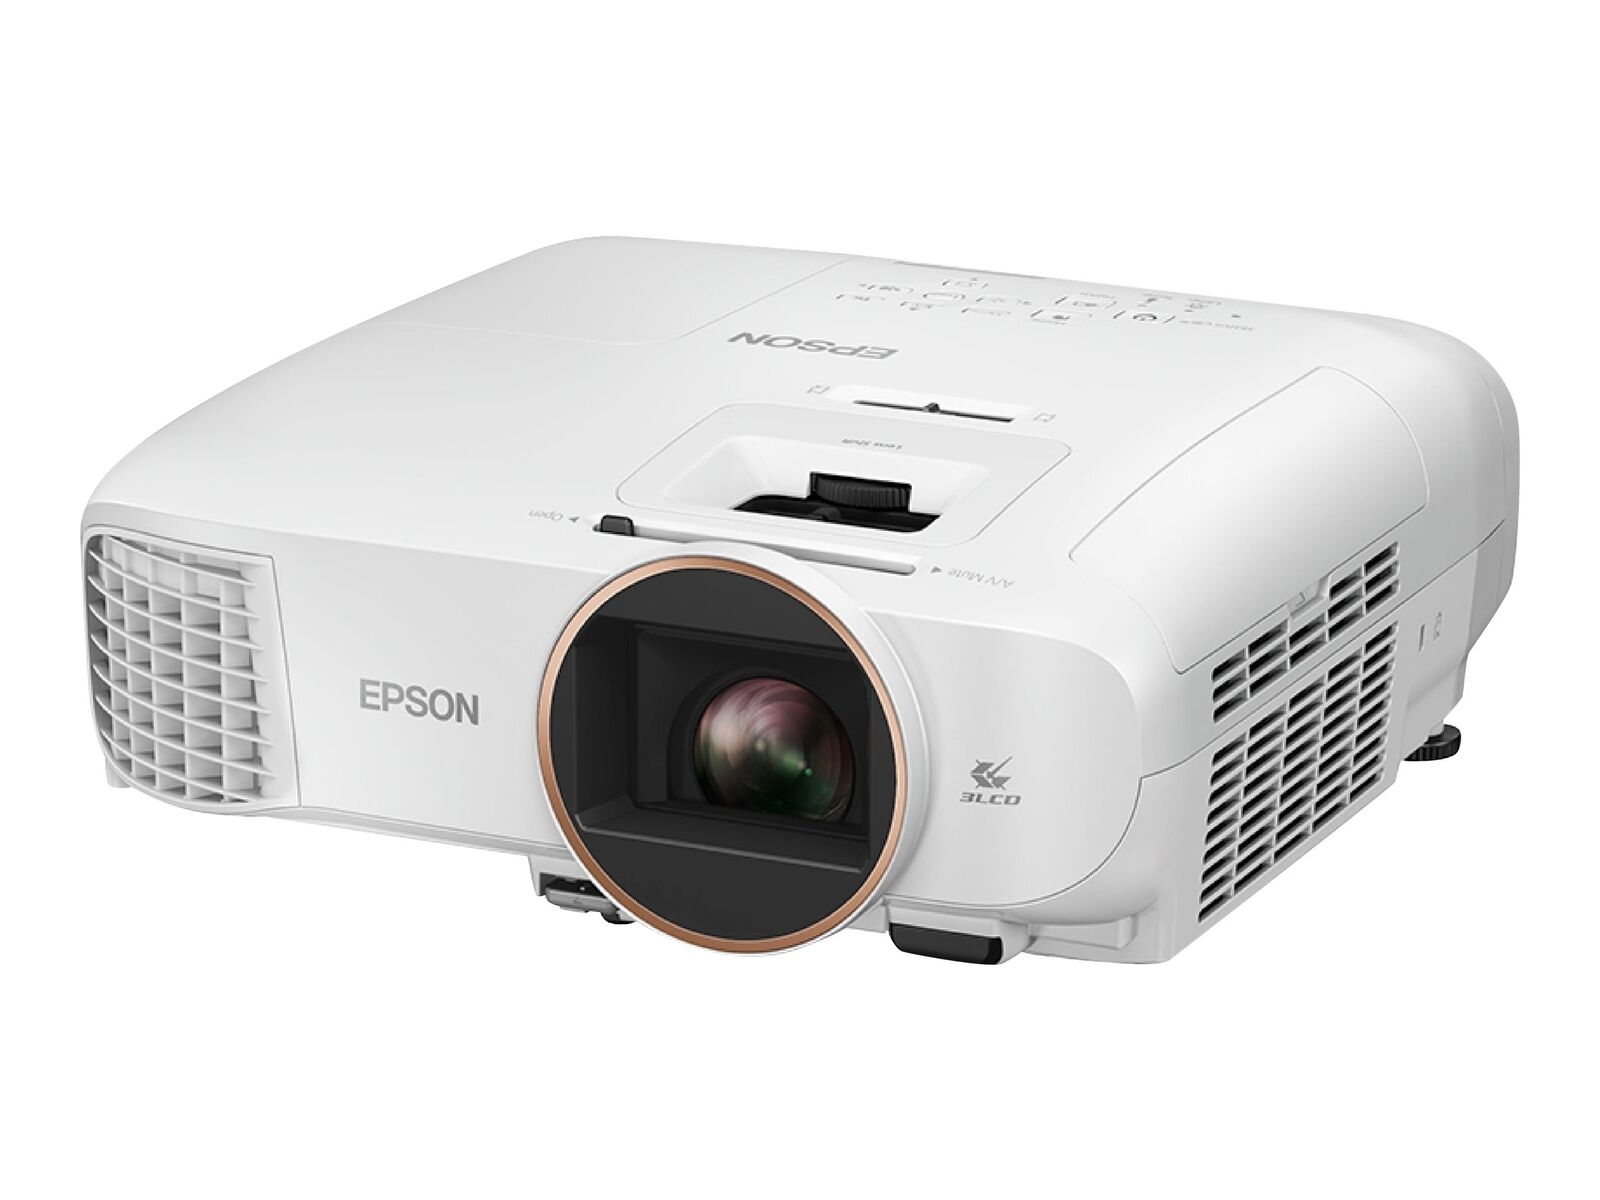 Proiettore Epson Eh-tw5825 Full Hd 2700 Lm 1920 X 1080 Px